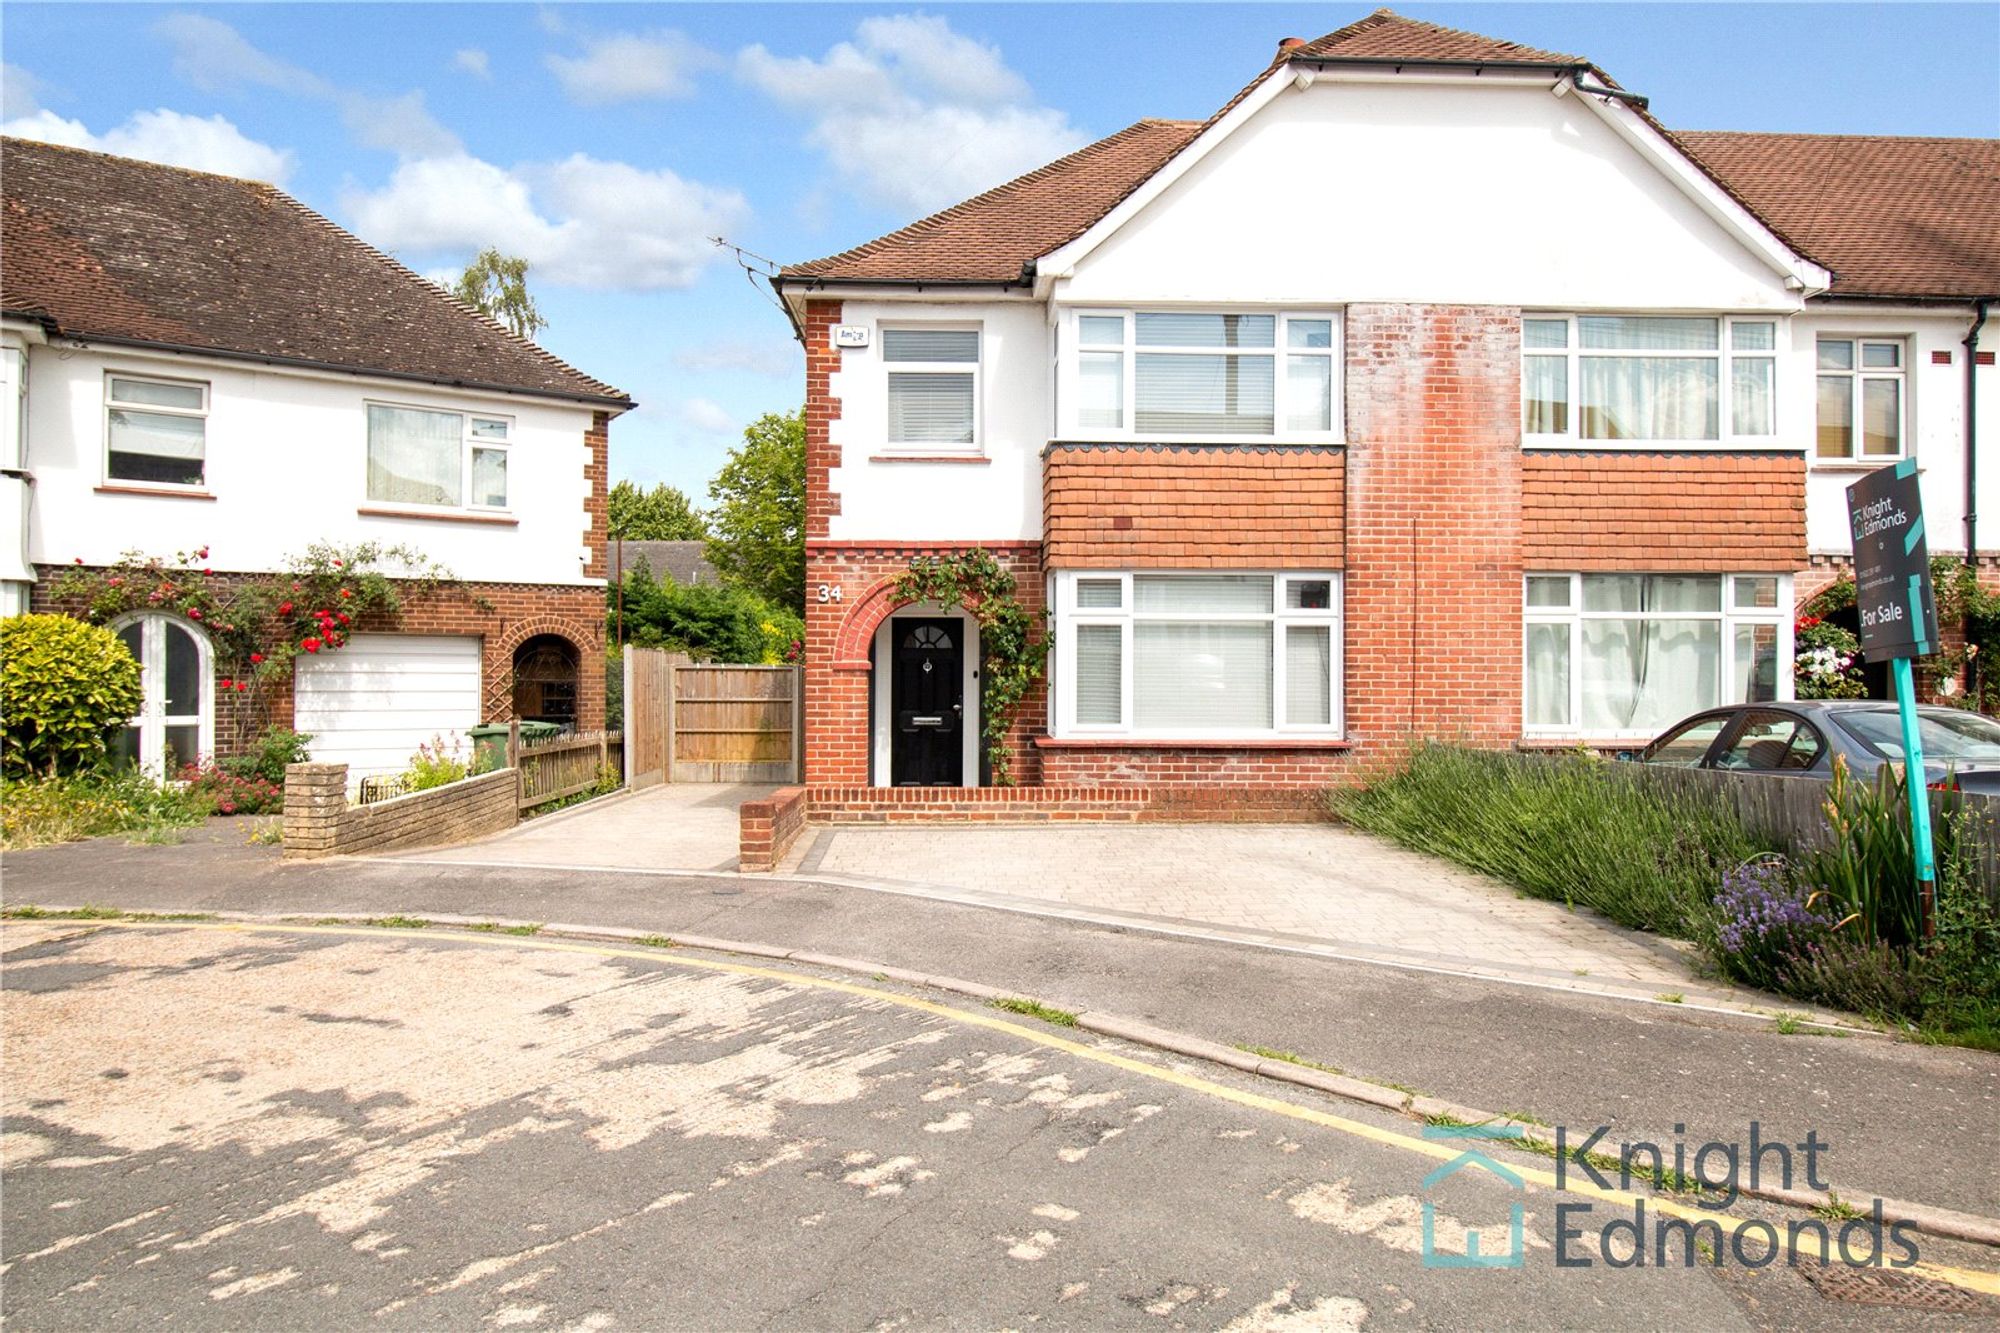 3 bed semi-detached house for sale in Woodville Road, Maidstone, ME15